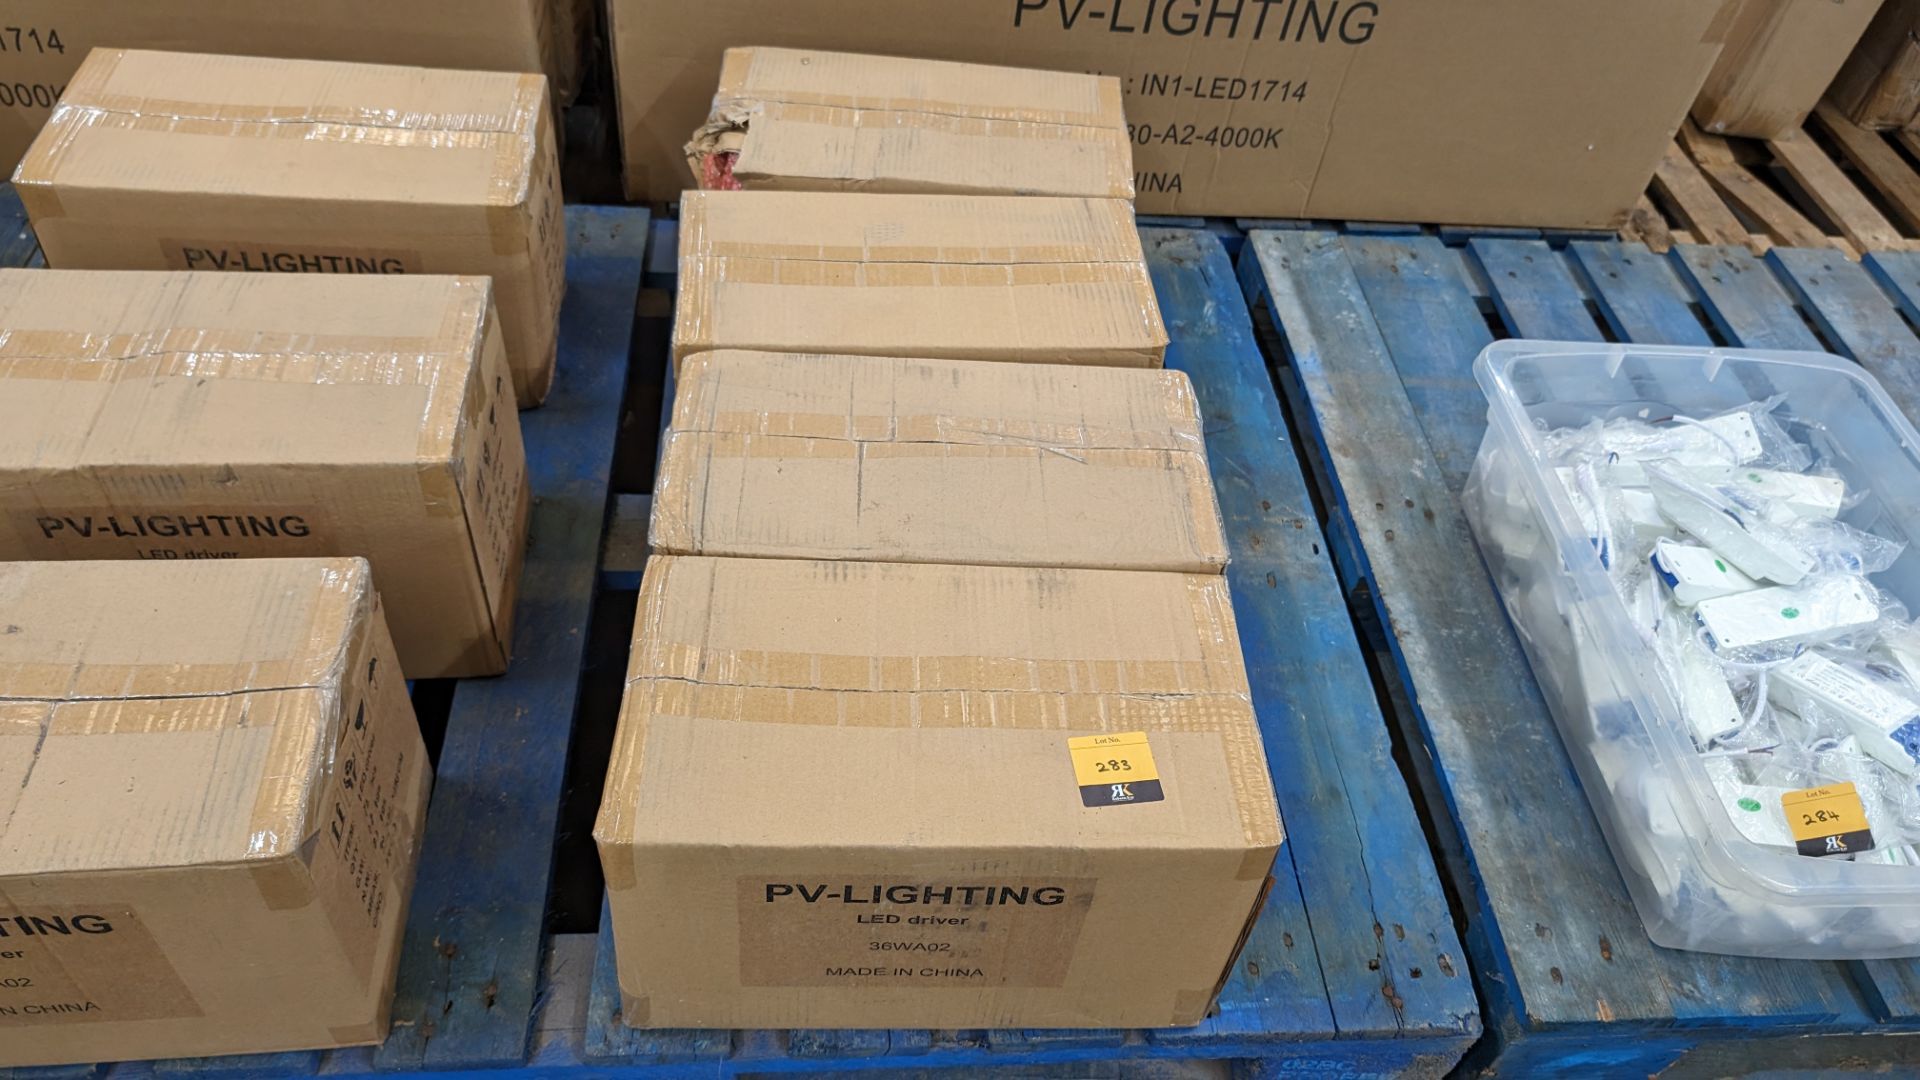 Approximately 288 off LED drivers, model IN-36WA02, 36VDC, 950mA - 4 boxes